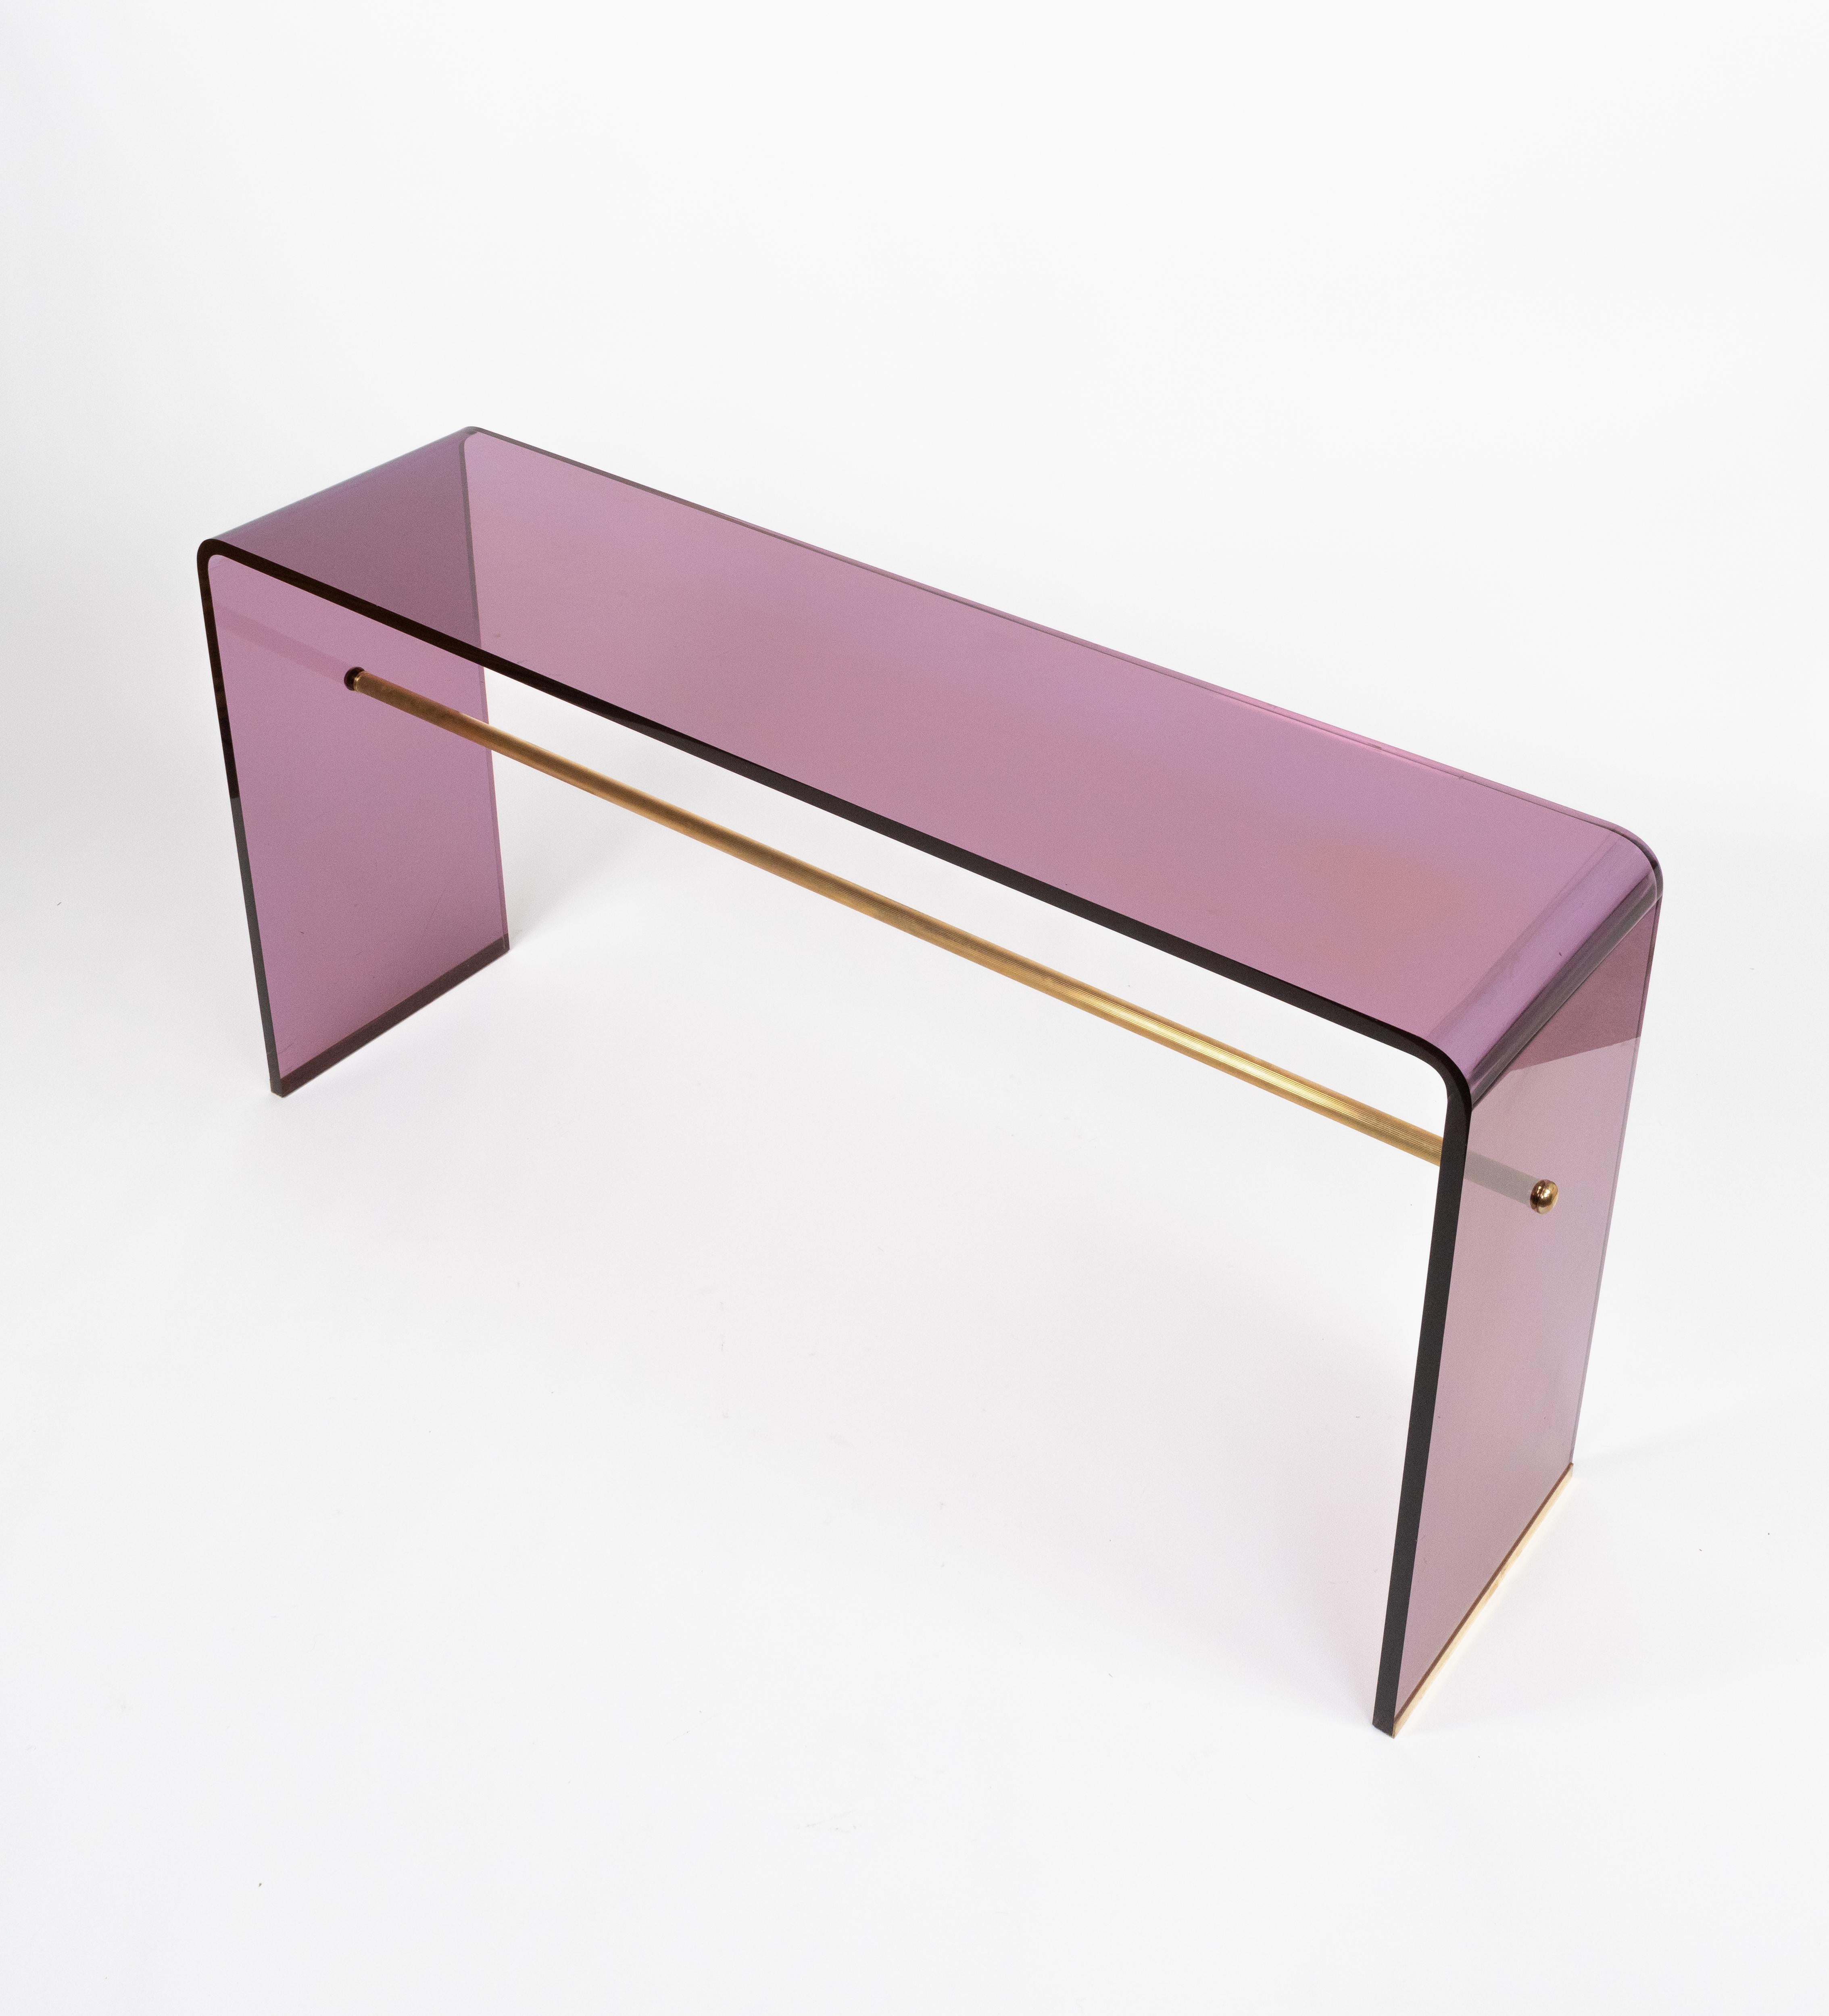 Console Table in Purple Lucite and Brass Alessandro Albrizzi Style, Italy 1970s For Sale 2